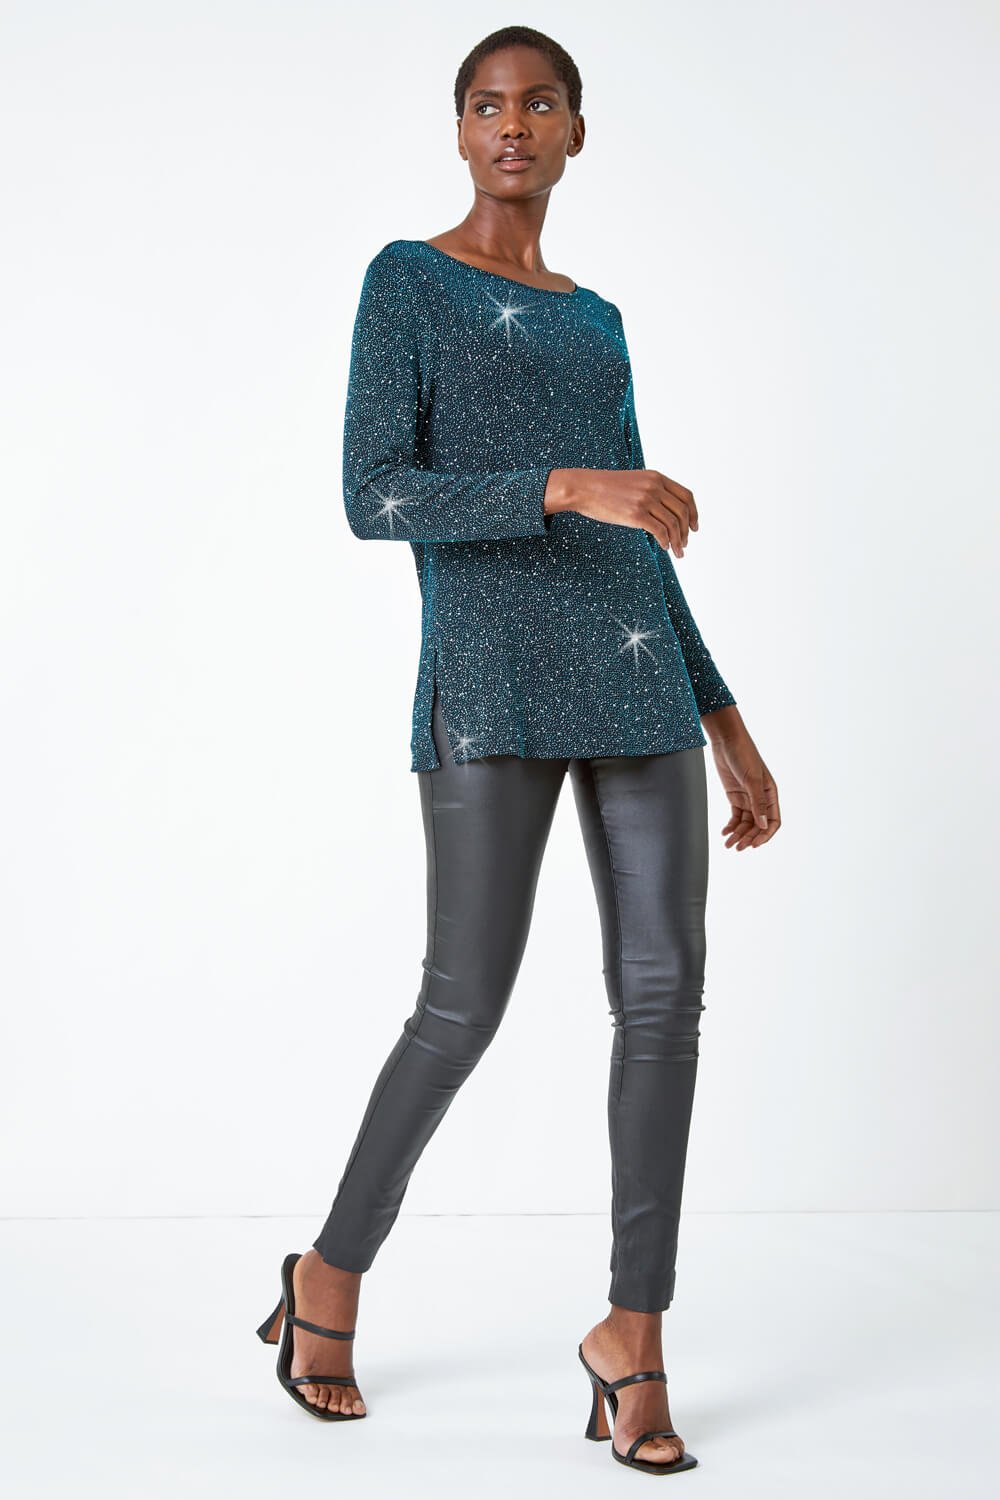 Teal Sparkle Cowl Back Detail Stretch Top, Image 2 of 5